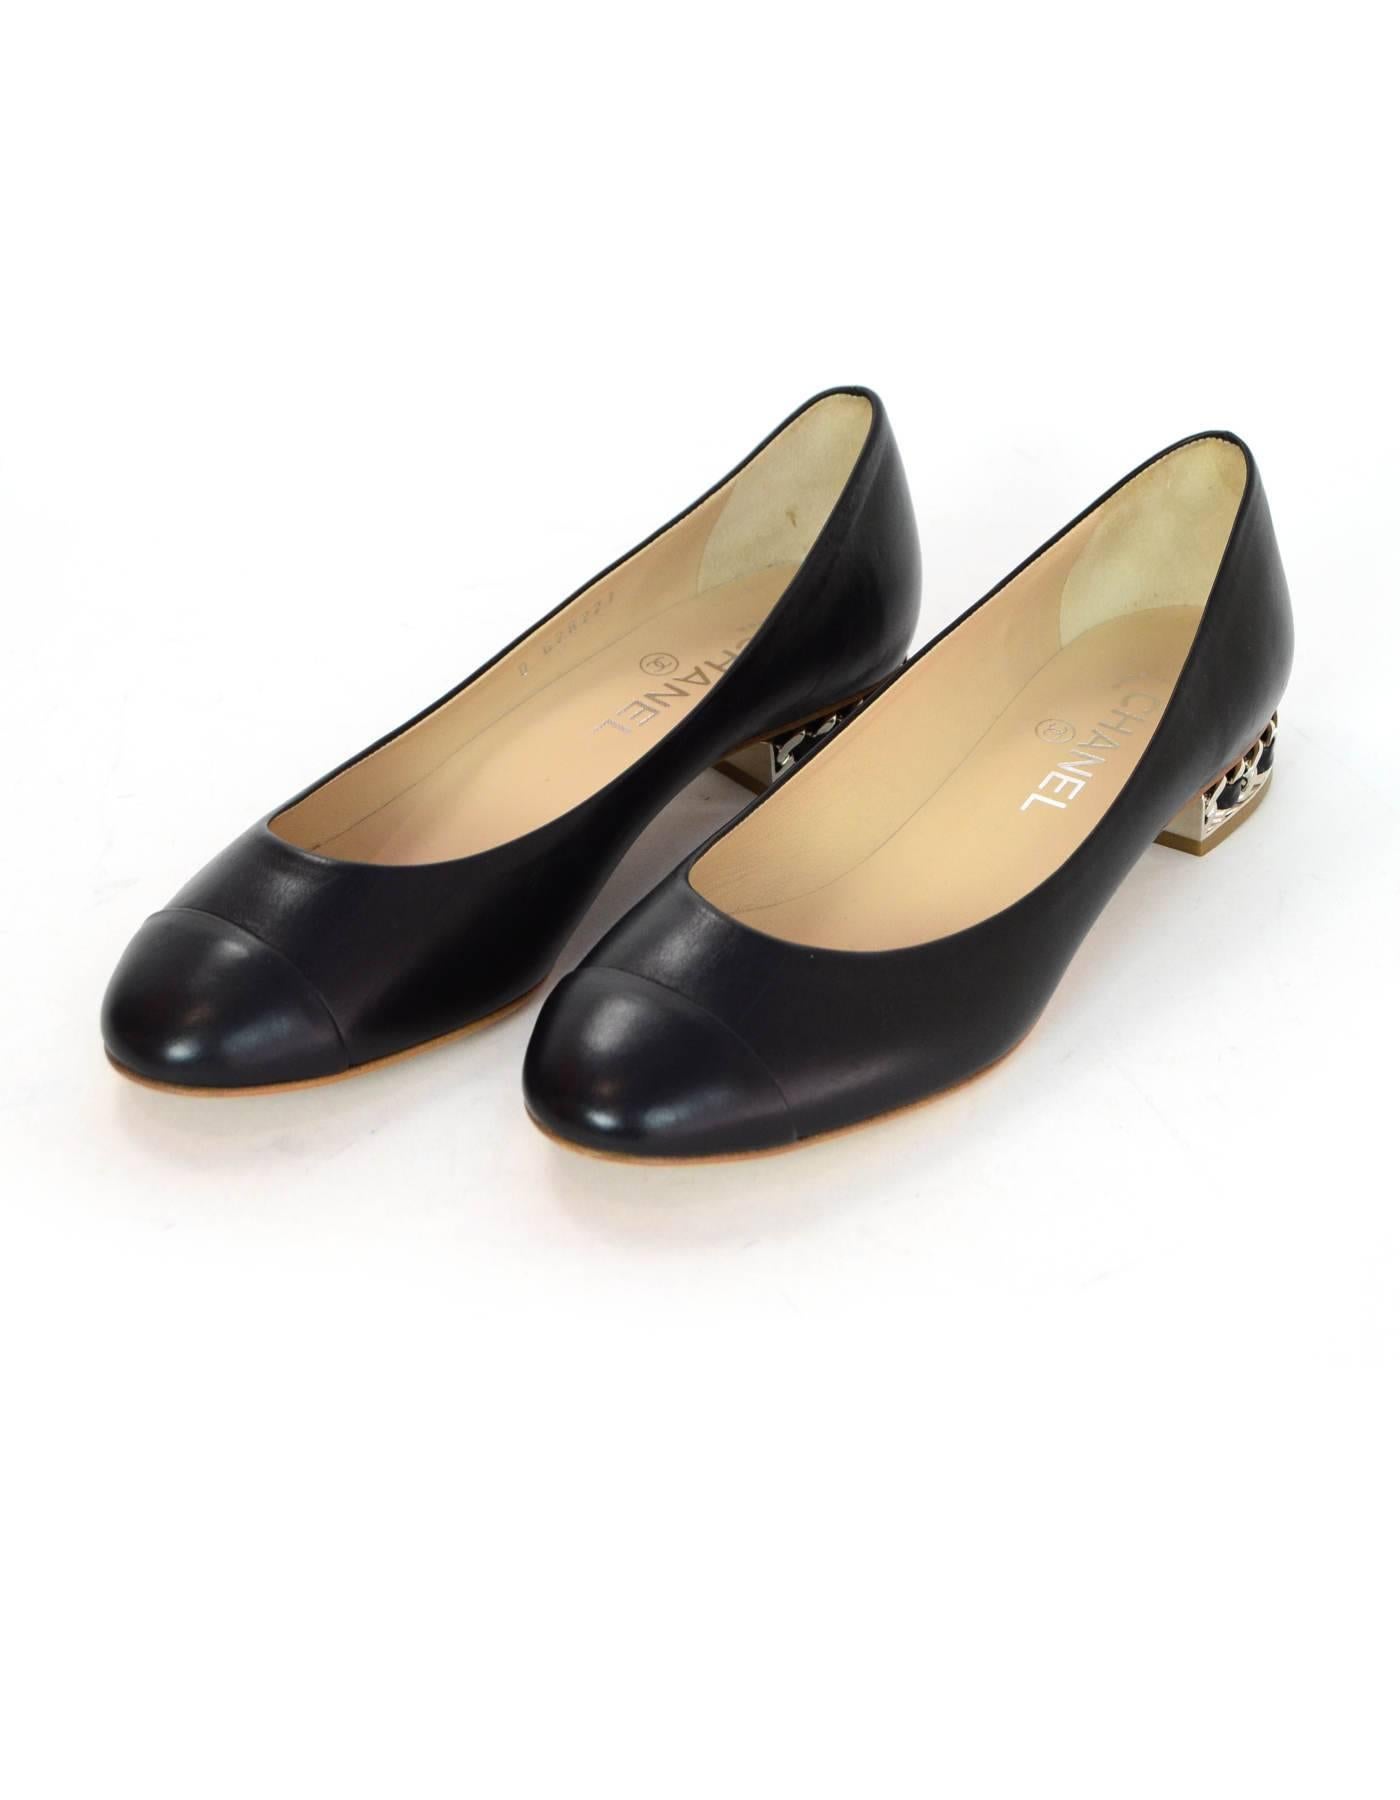 Chanel Black Leather Flats with Chain Heels Sz 39 NIB

Made In: Italy
Color: Black
Materials: Leather, metal
Closure/Opening: Slide on
Sole Stamp: CC 39 Made in Italy
Retail Price: $995 + tax
Overall Condition: Excellent pre-owned condition -